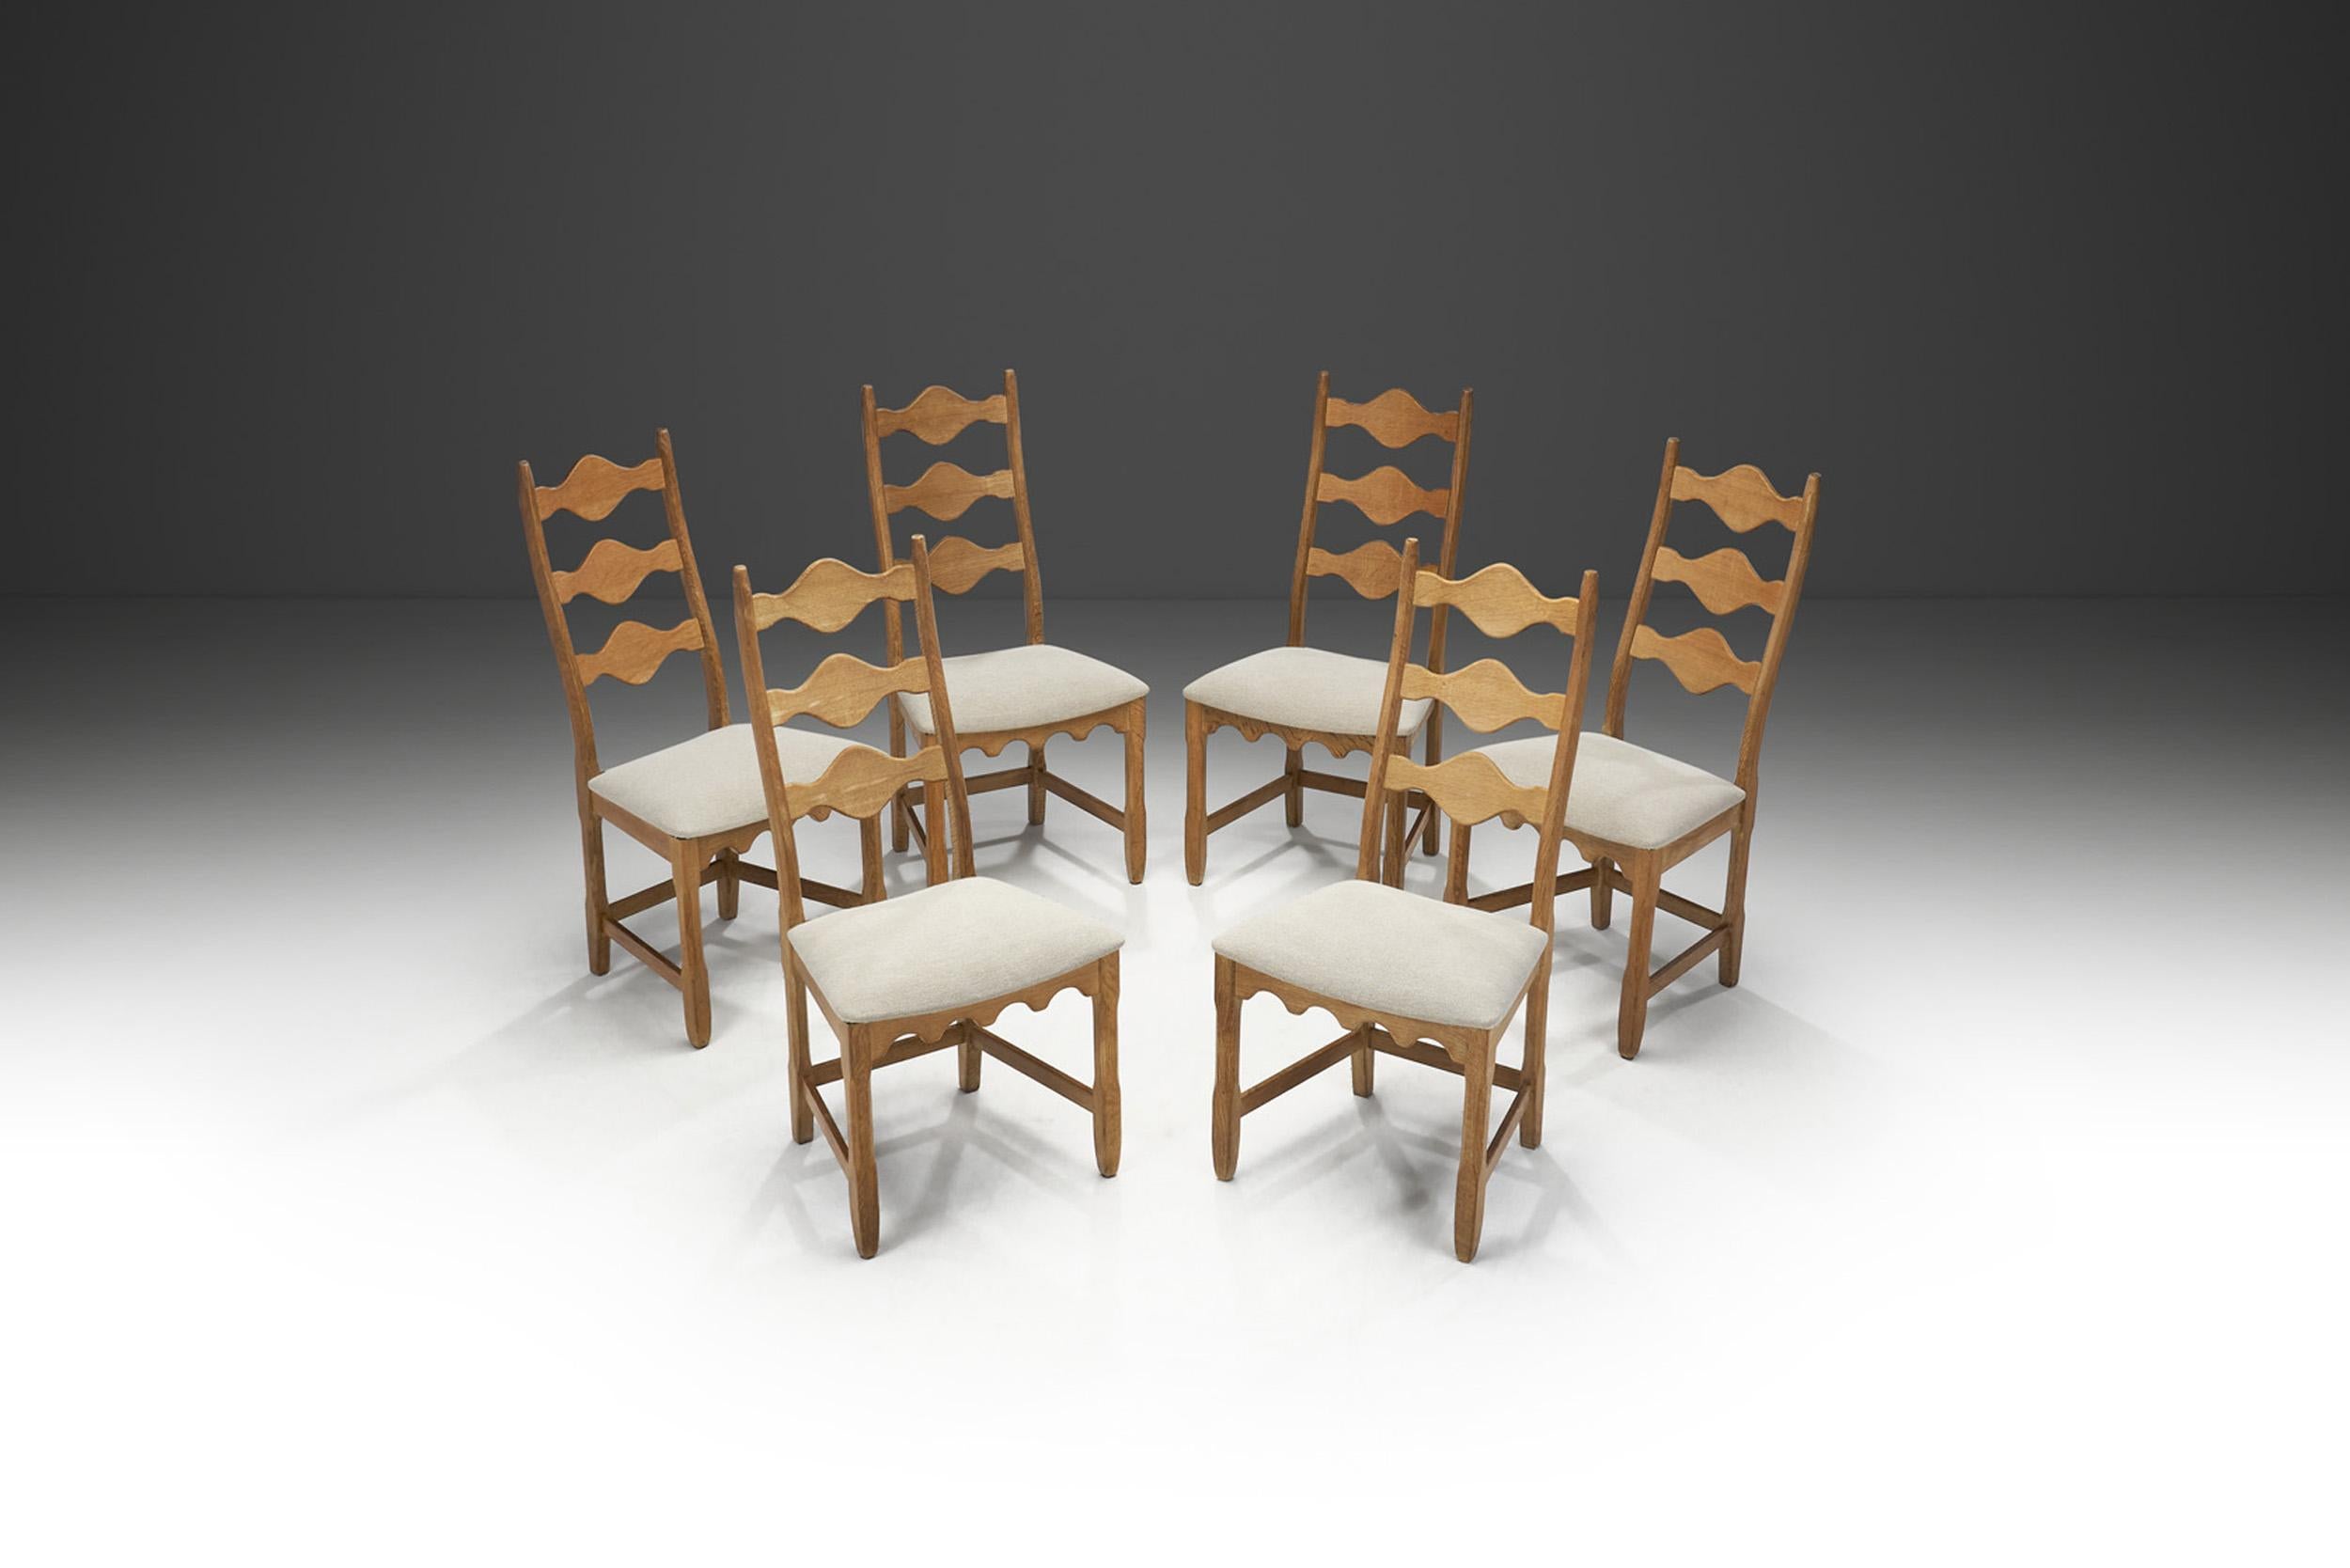 Henning Kjaernulf dining chairs for Nyrup Møbelfabrik, Denmark 1950s

This impressive mid-century dining set of six is representative of the fundamental axioms of Scandinavian design that revolve around quality and functionality and pairs it with